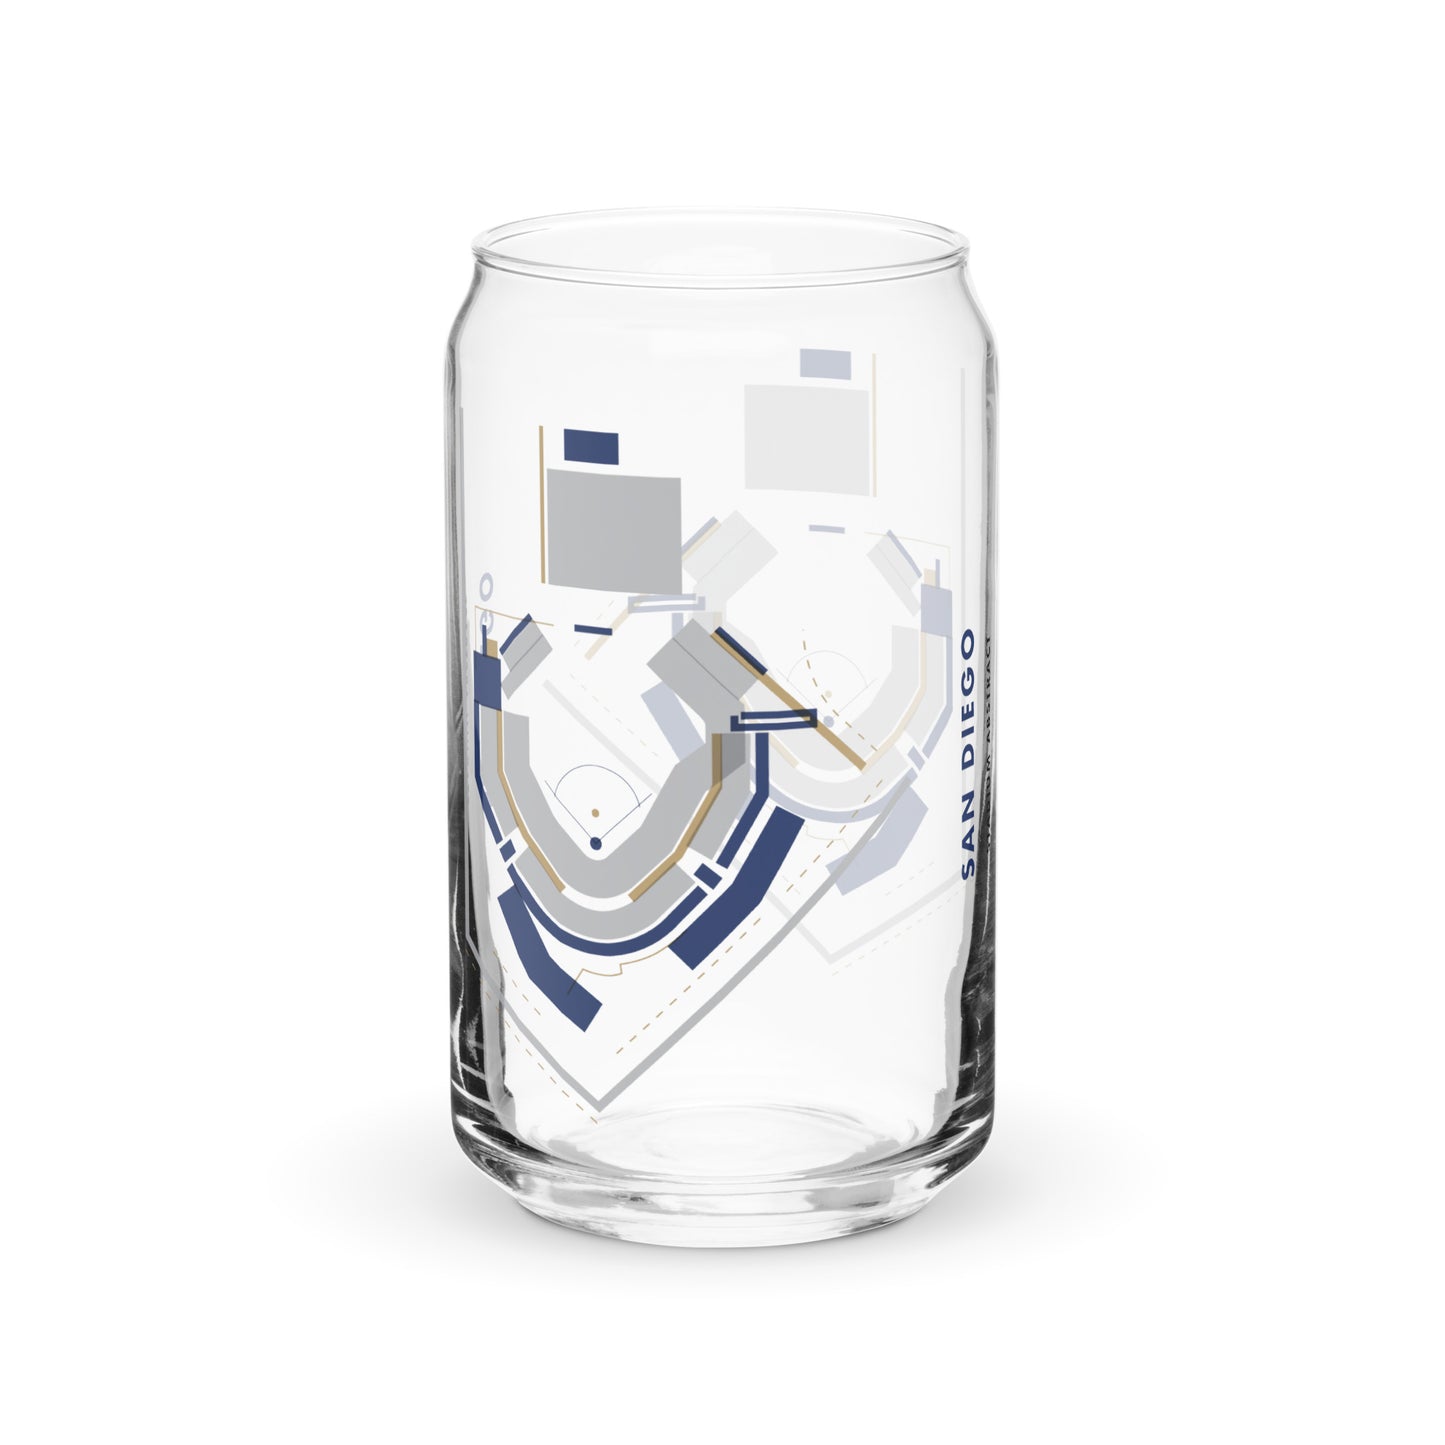 San Diego Padres | Can-shaped glass